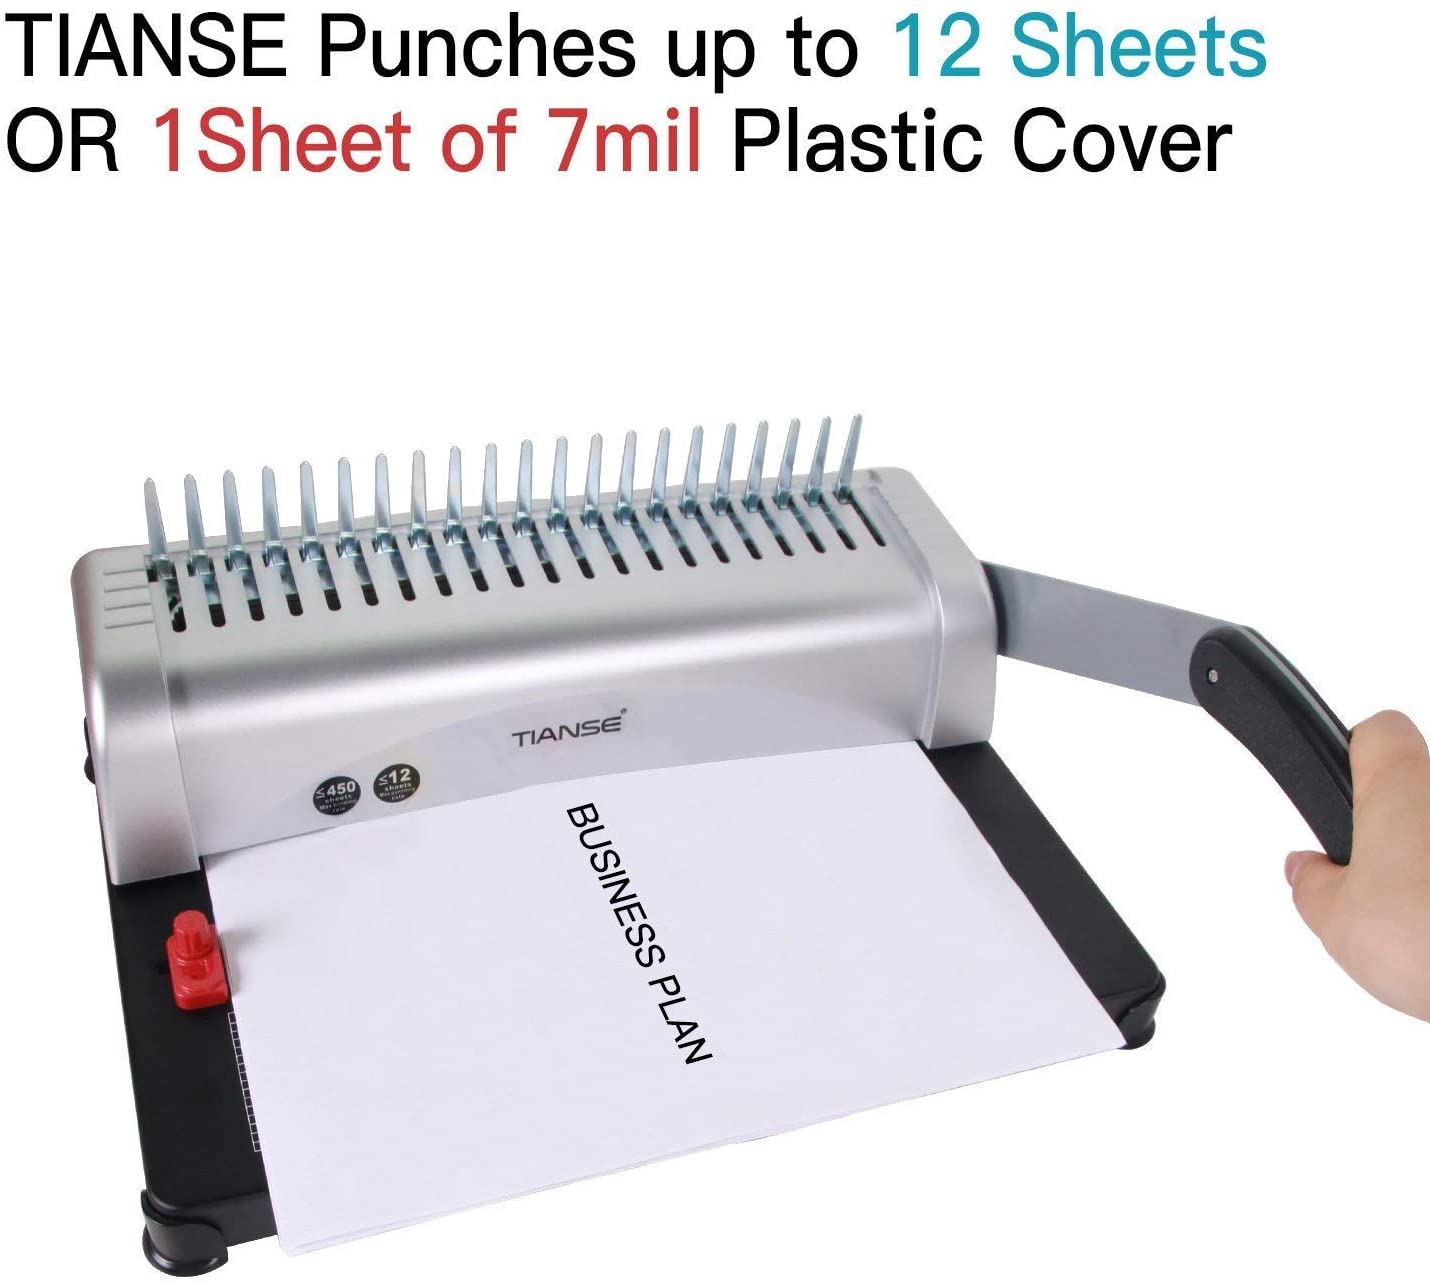 TIANSE Coil Binding Machine, Electric Coil Inserter, Manual Round Hole Punch,  15 Sheets Punch Capacity, Perfect for Letter Size / A4 / A5, Comes with  100pcs 5/16 Plastic Coil Binding Spines & Plier